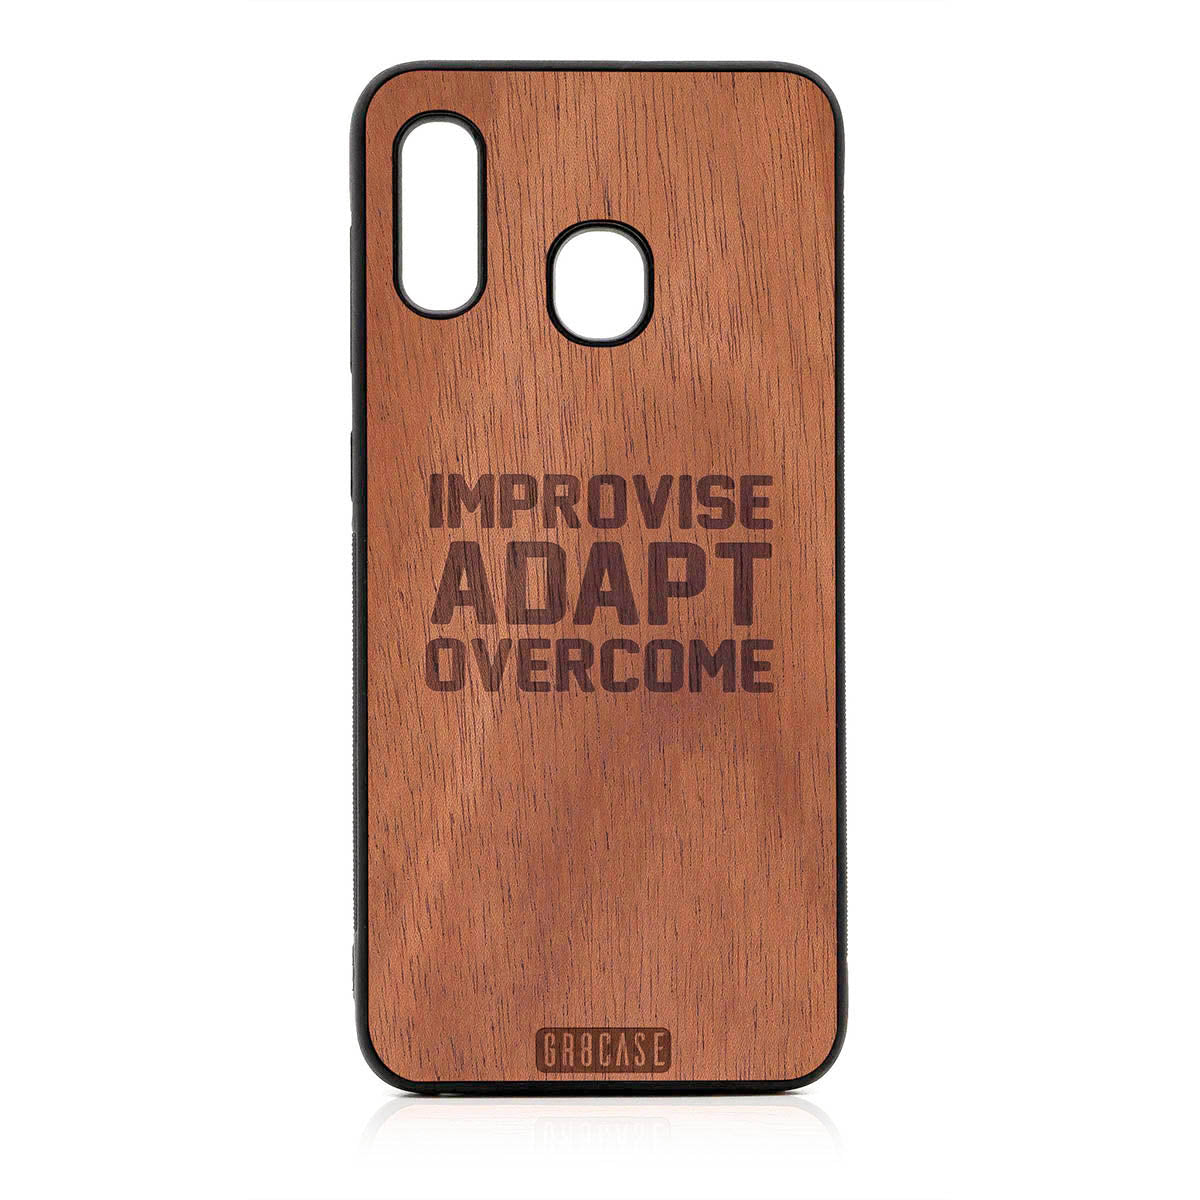 Improvise Adapt Overcome Design Wood Case For Samsung Galaxy A20